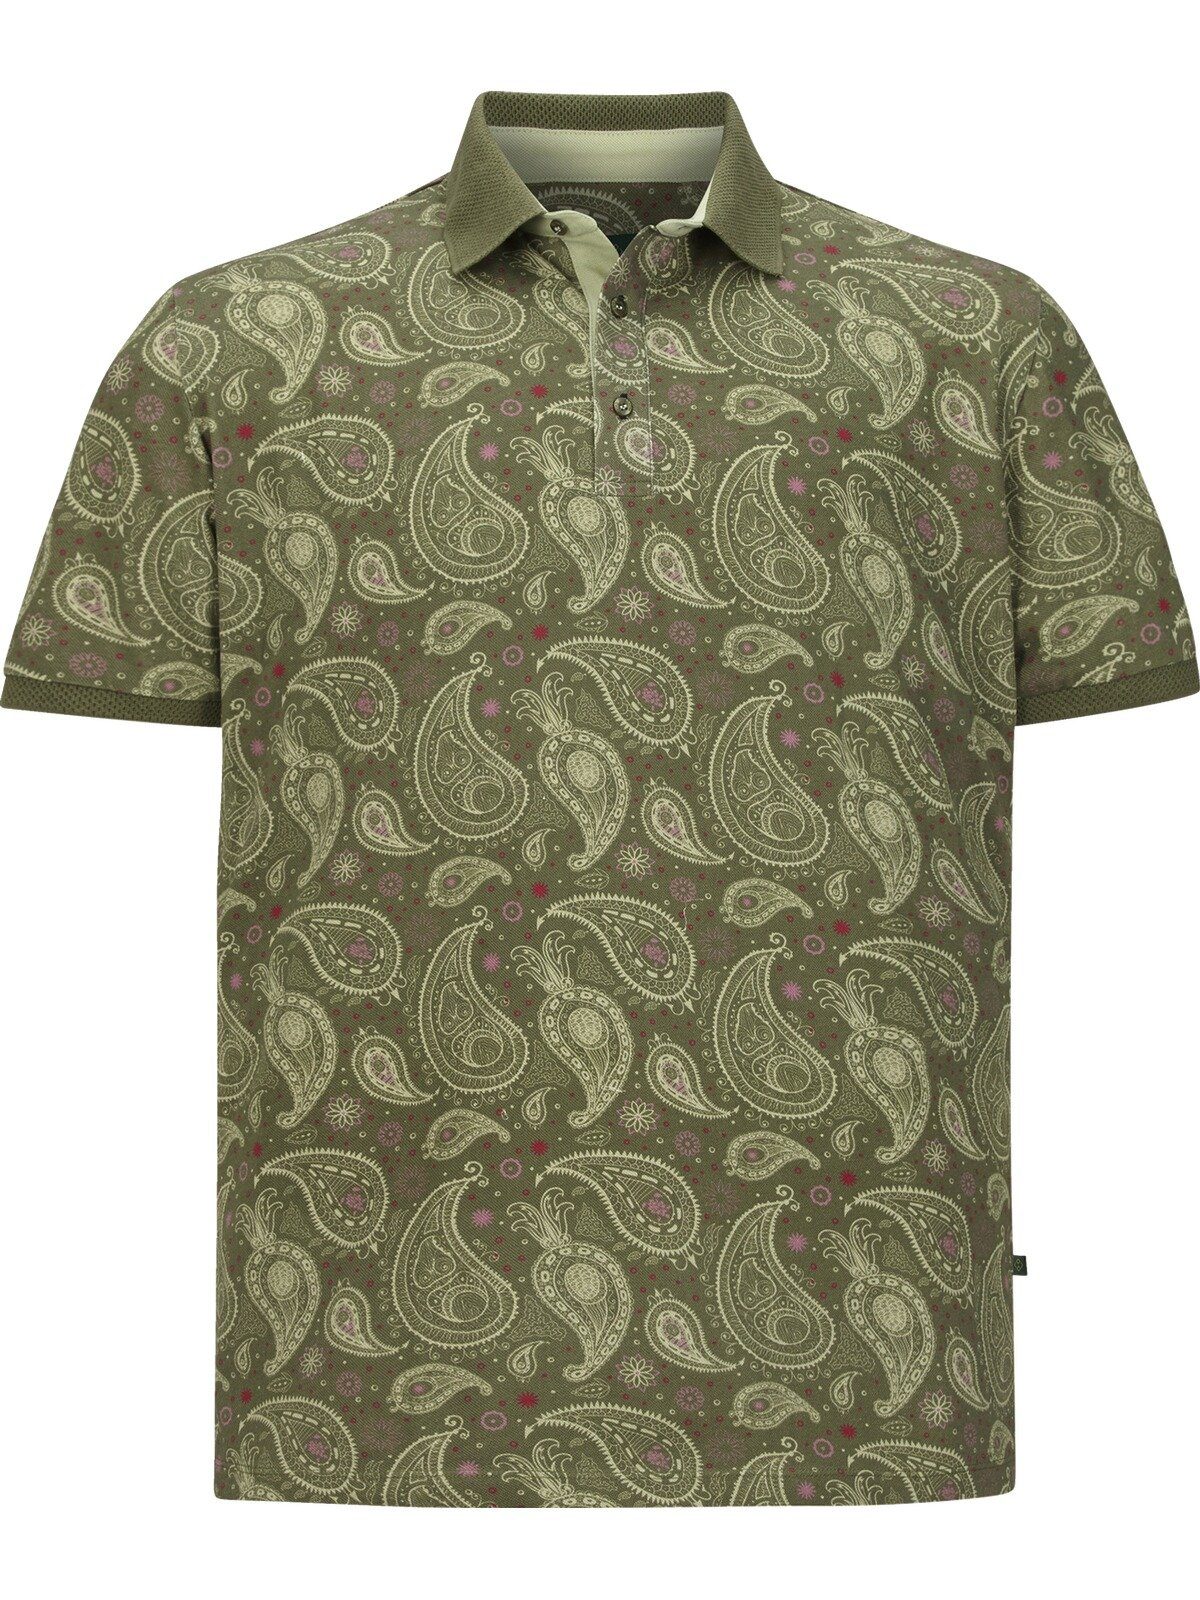 SUITBERT Paisley Muster, khaki EARL Colby Charles Fit Poloshirt Comfort